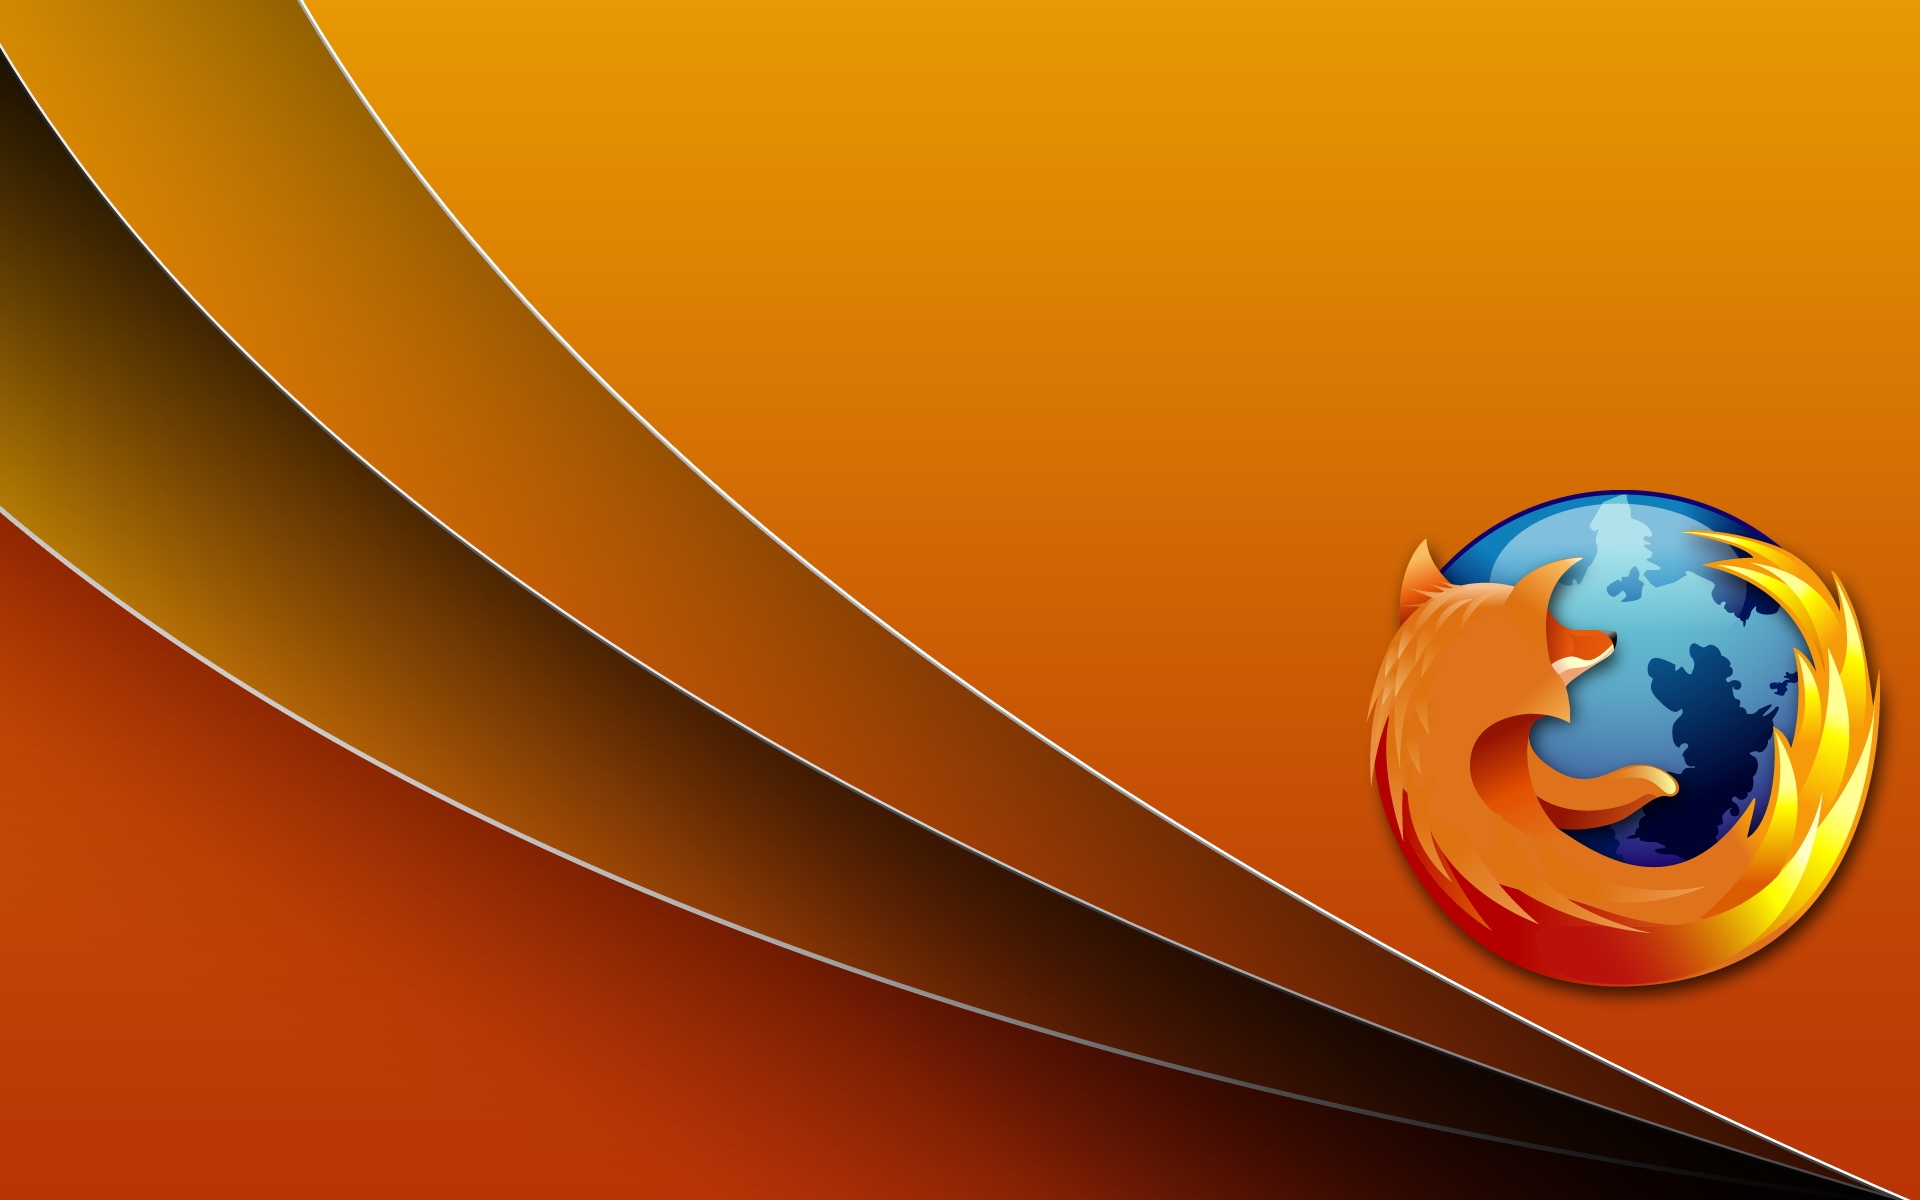 what is mozilla firefox start page